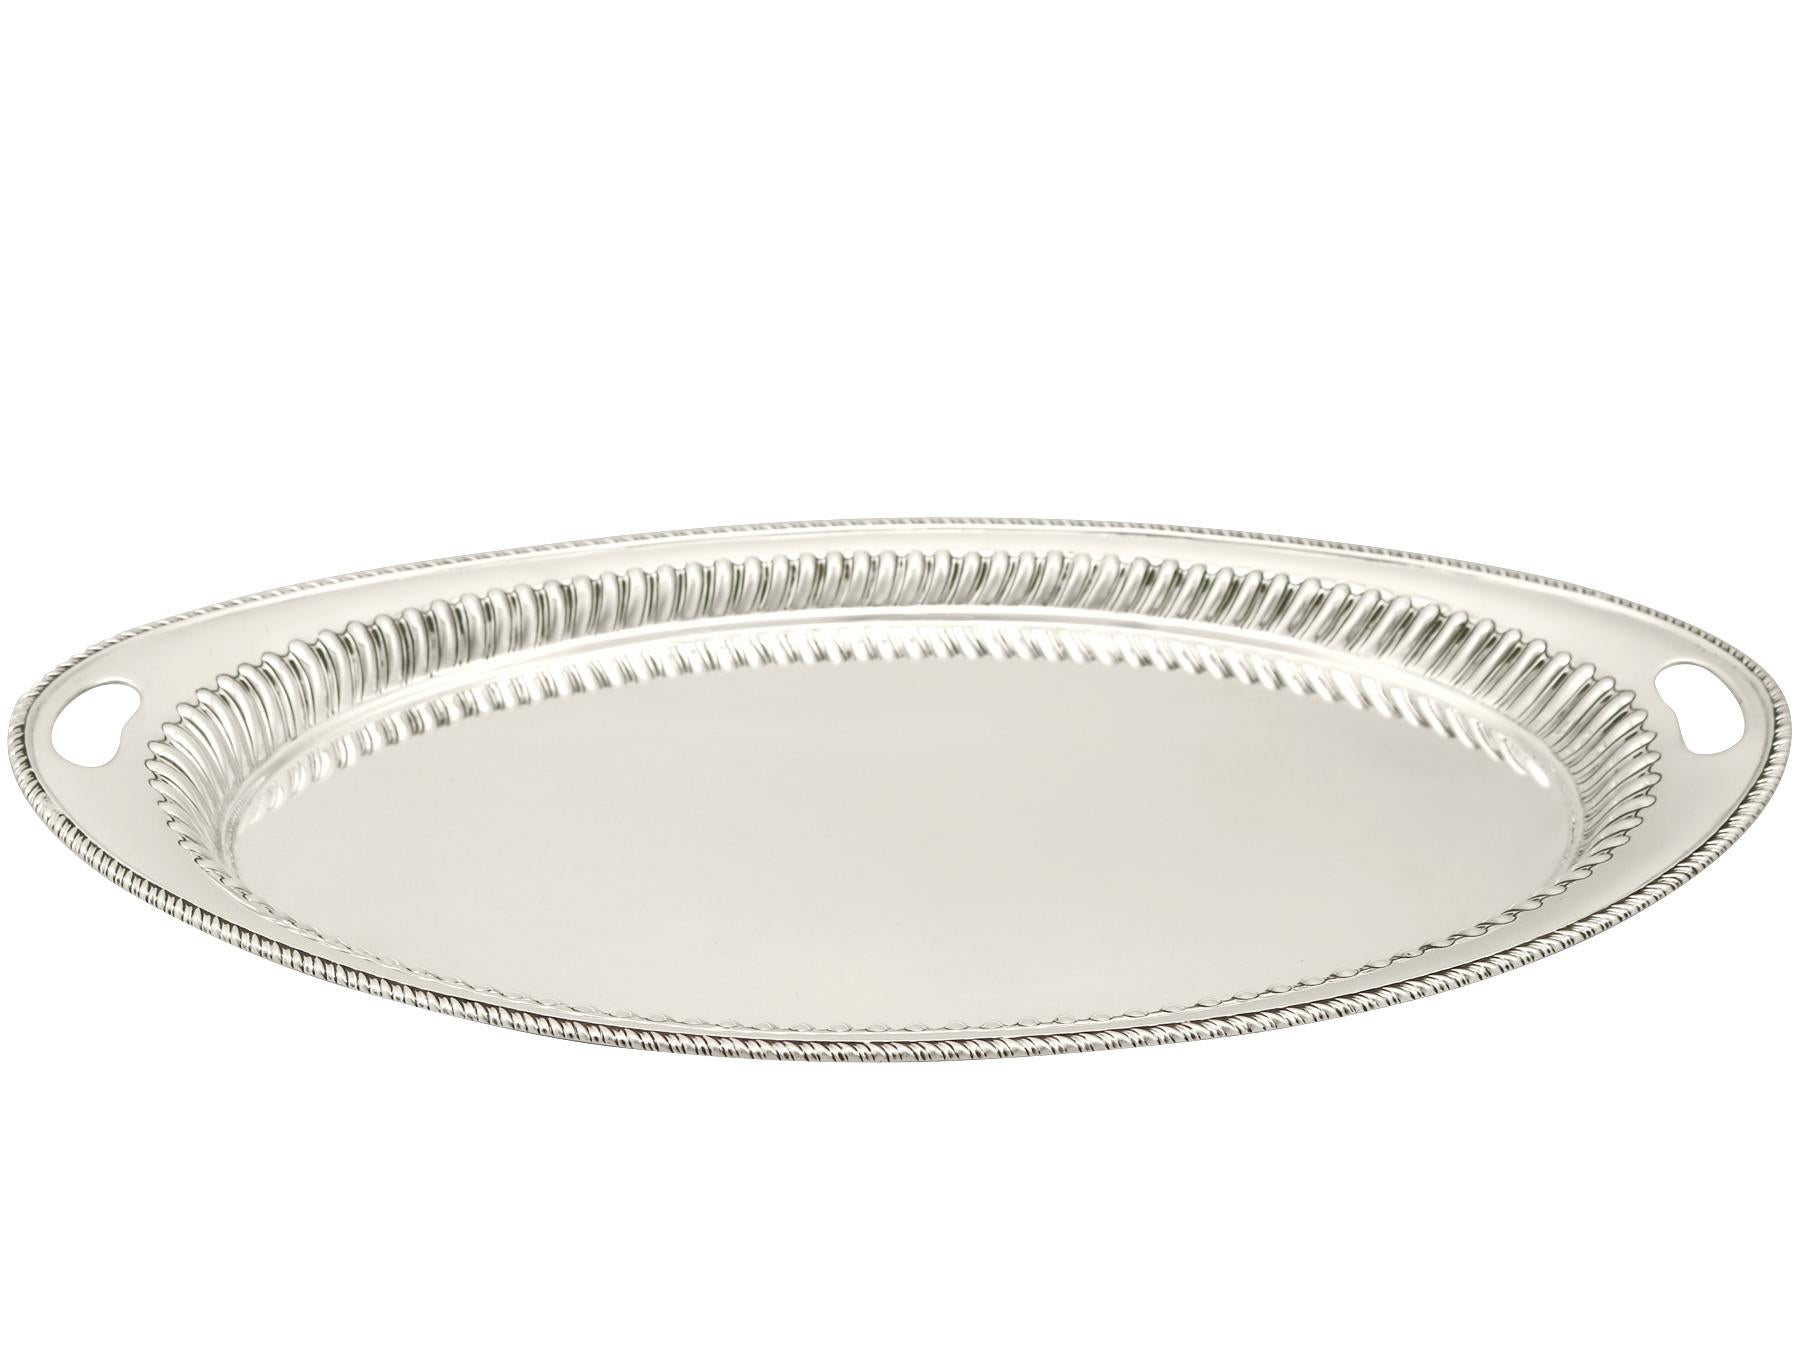 An exceptional, fine and impressive antique Victorian English sterling silver tray; an addition to our antique silver teaware collection.

This exceptional antique Victorian sterling silver tray has a rounded Navette shaped form.

The surface of